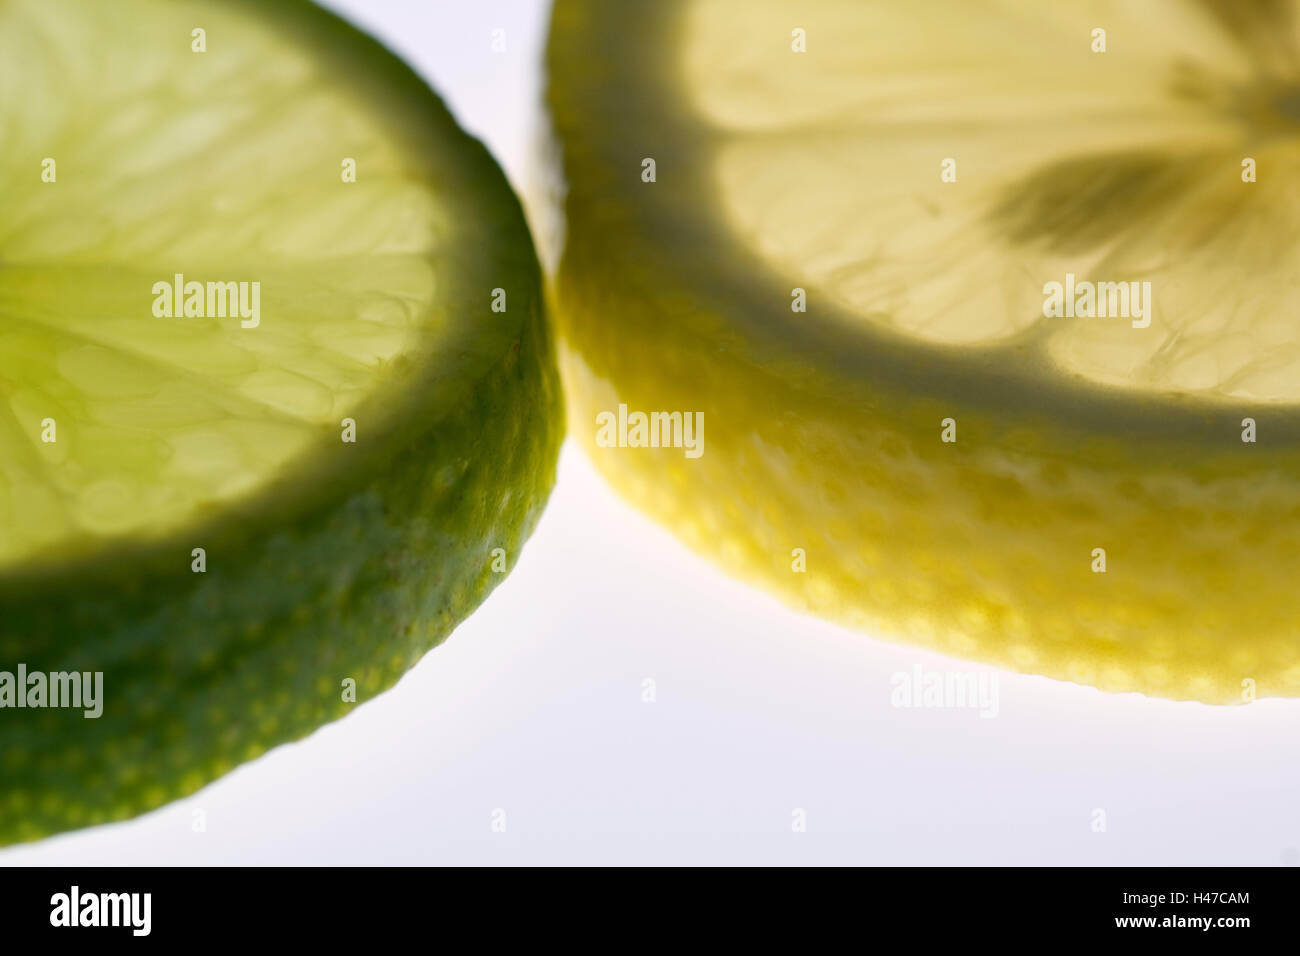 Real lime, lemon, cut open, slices, transmitted light, detail, Food, fruit, fruits, tropical fruits, citrus fruits, chopped, ripe, acidly, juicy, lime slice, slice lemon, vitamins, healthy, freshness, colour, peel, green, yellow, flesh, medium close-up, product photography, curled, studio, Stock Photo